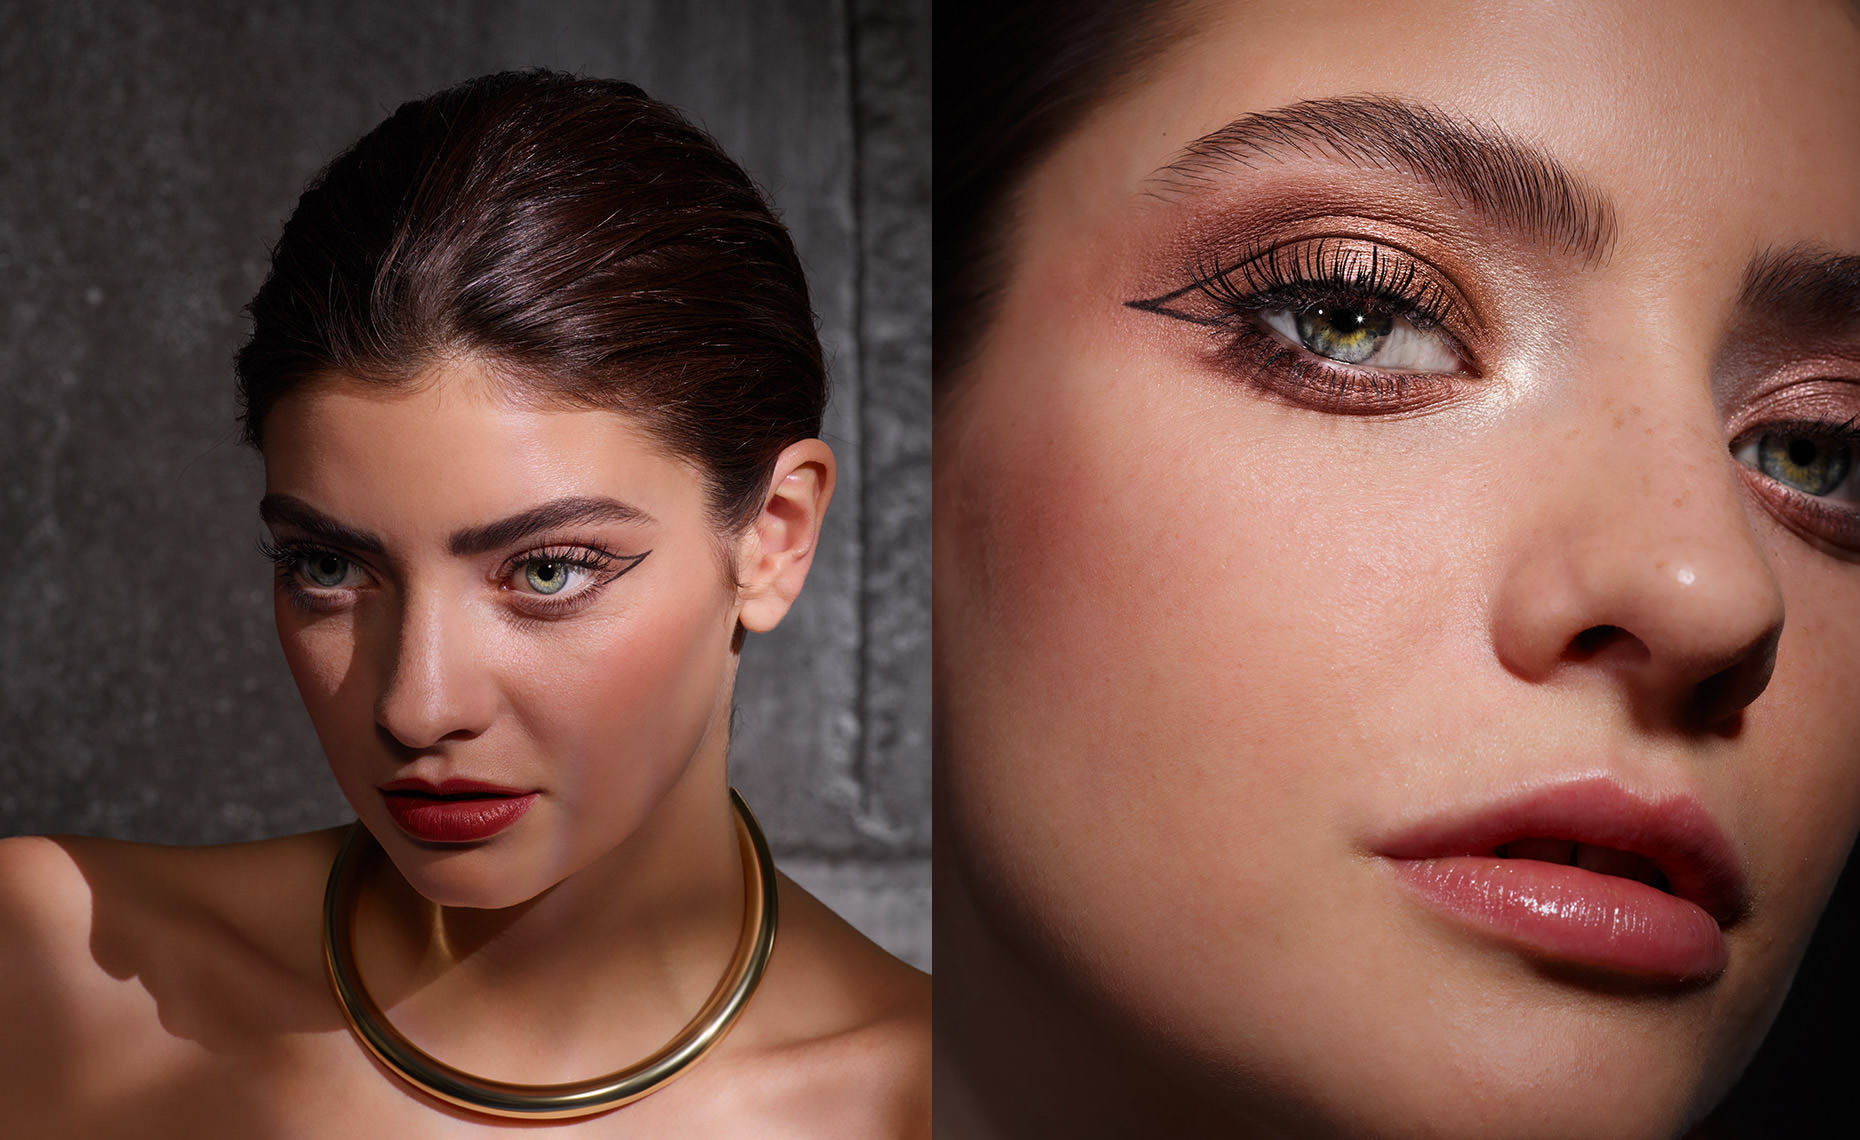 Beauty Shooting for lov cosmetics  - Marc Wuchner - Beauty Still Life Cosmetic and Texture Photographer, Frankfurt